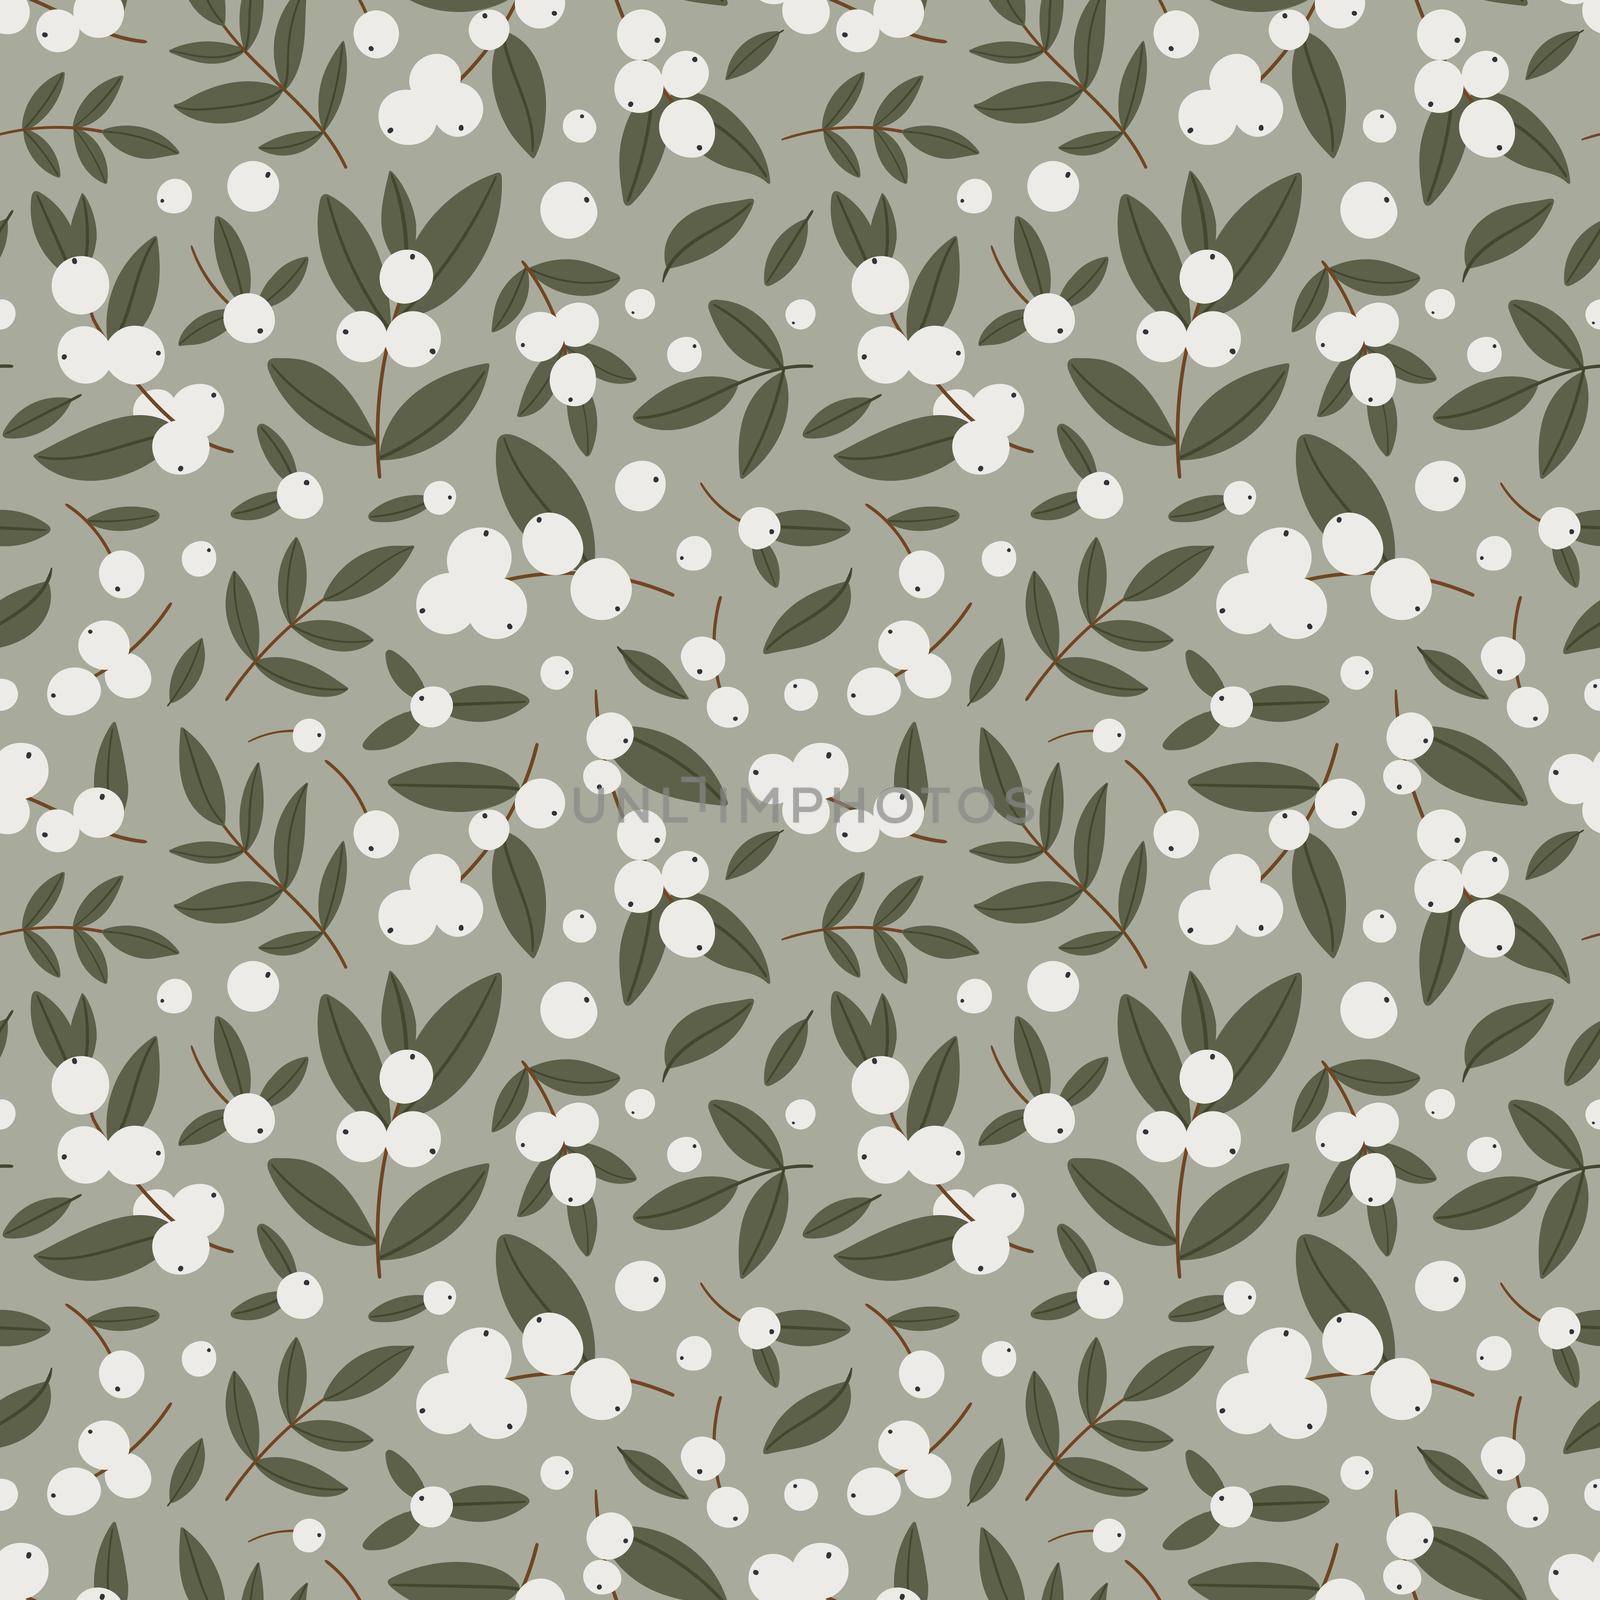 Seamless pattern with winter white berries on an olive background. Vector illustration.